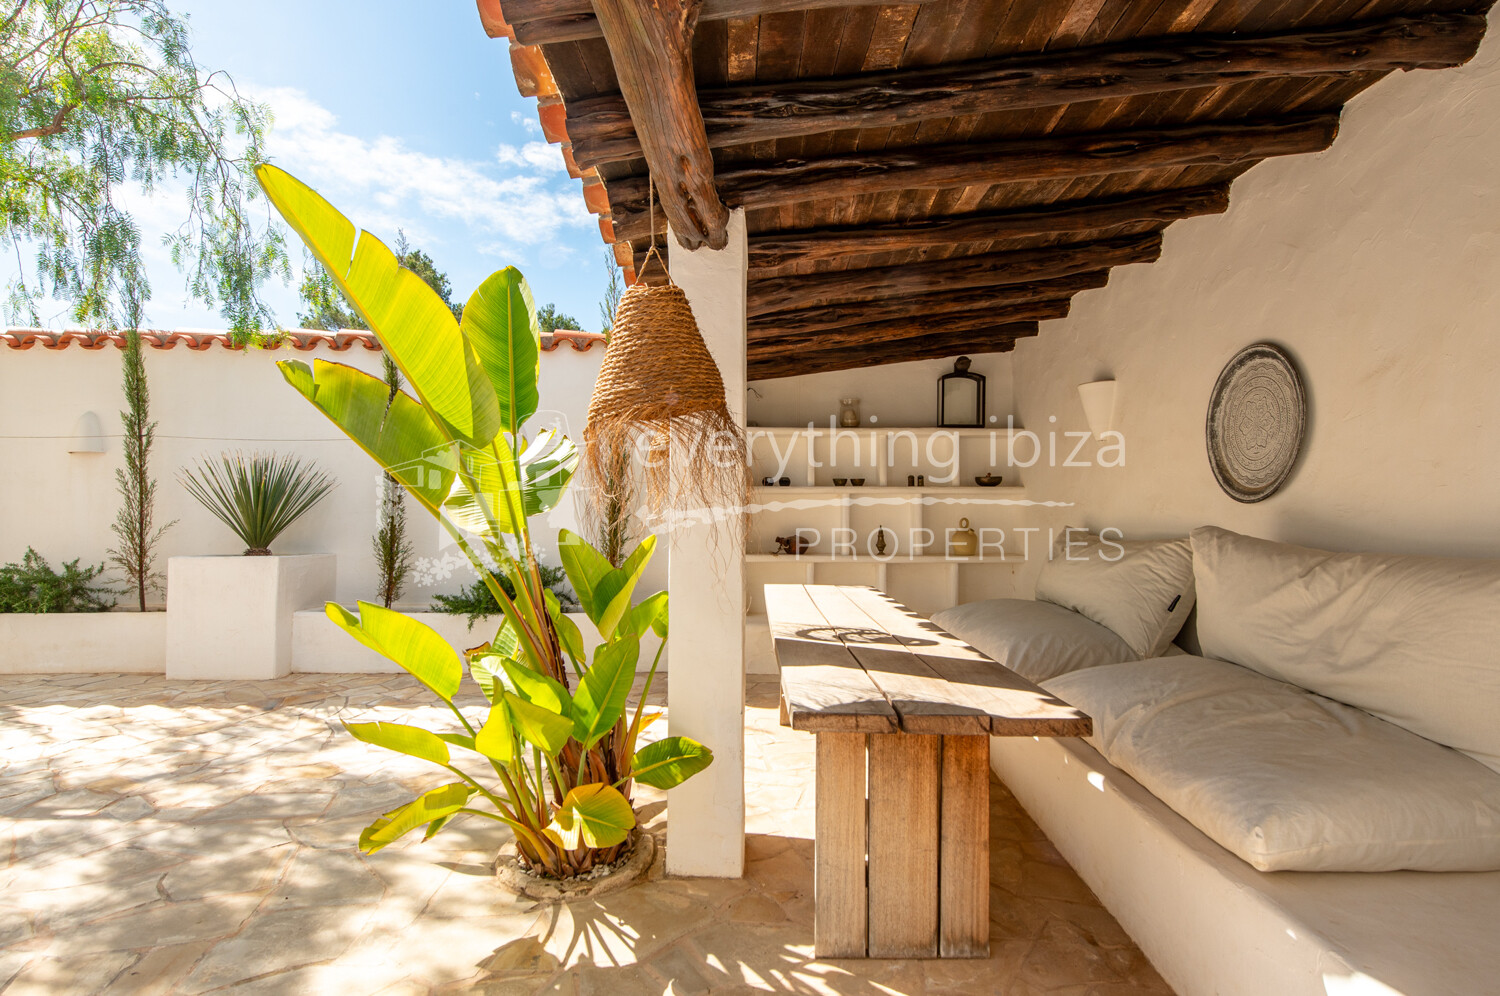 Cosy Renovated Turn Key Ready Detached Villa Close to the Local Beach, ref. 1716, for sale in Ibiza by everything ibiza Properties